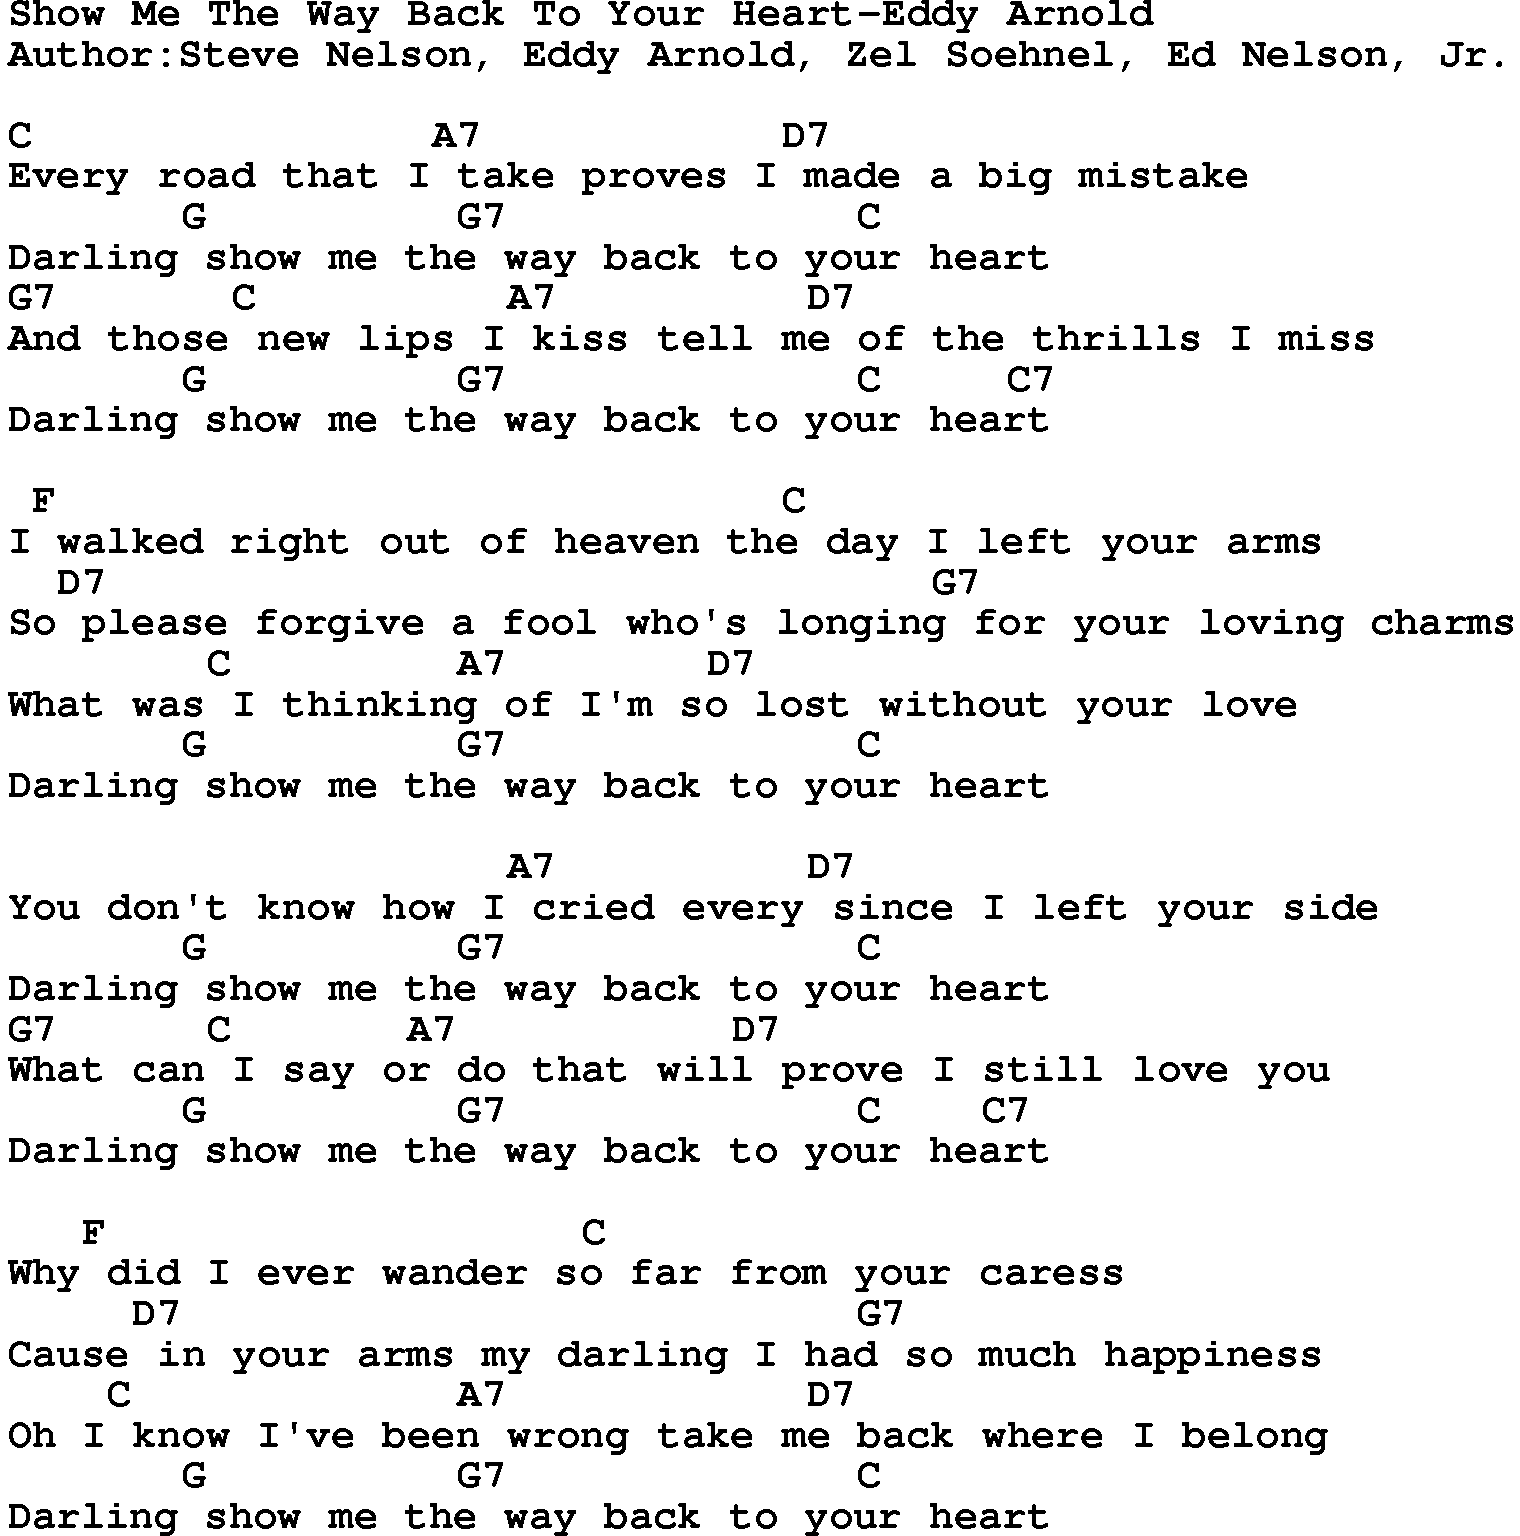 Country music song: Show Me The Way Back To Your Heart-Eddy Arnold lyrics and chords